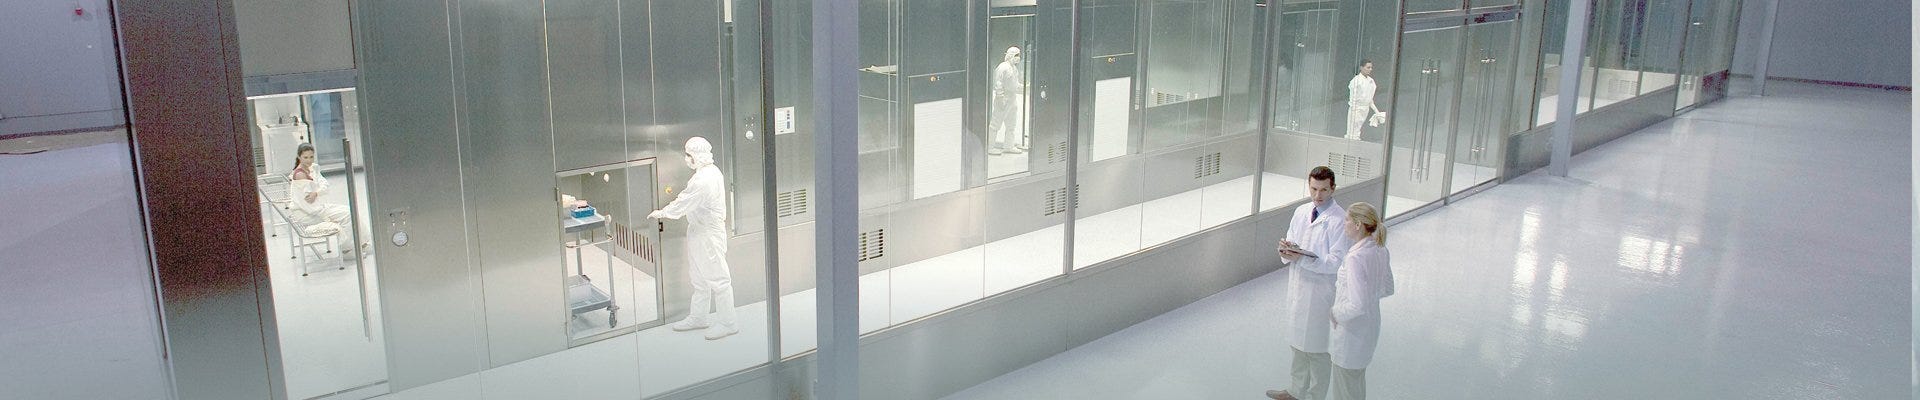 Double-wall modular steel cleanrooms are ideal for bio/pharmaceutical applications that require an easy-clean, aseptic environment